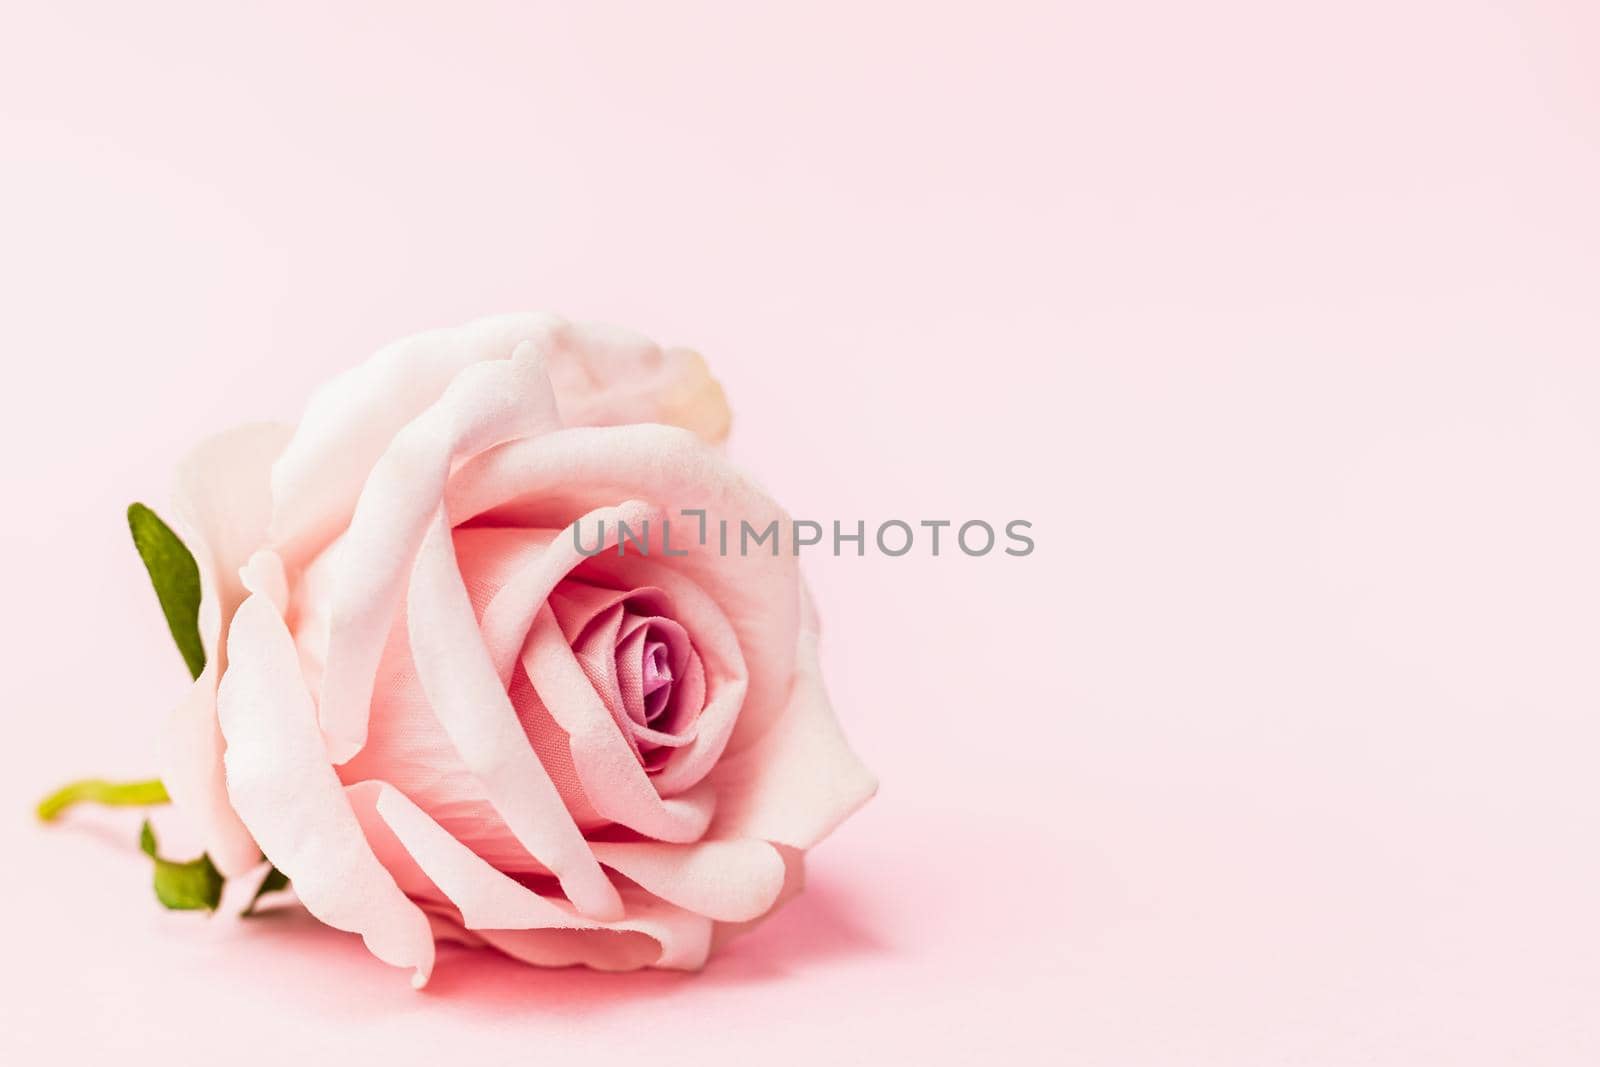 Artificial sweet pink rose with copy space on pink background for Valentine's day and love concept